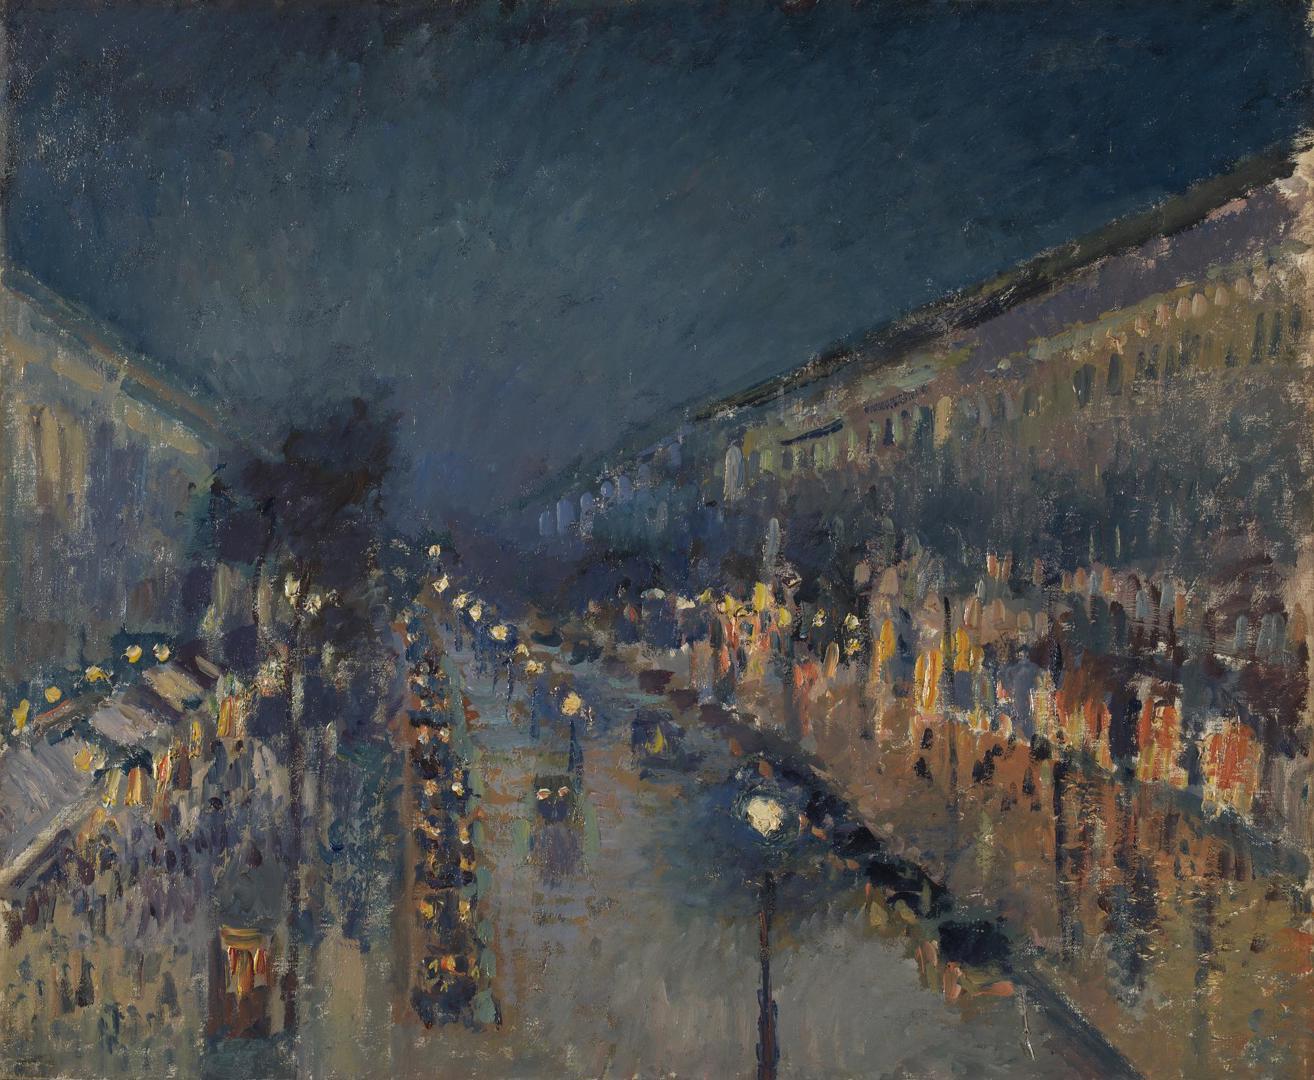 The Boulevard Montmartre at Night by Camille Pissarro